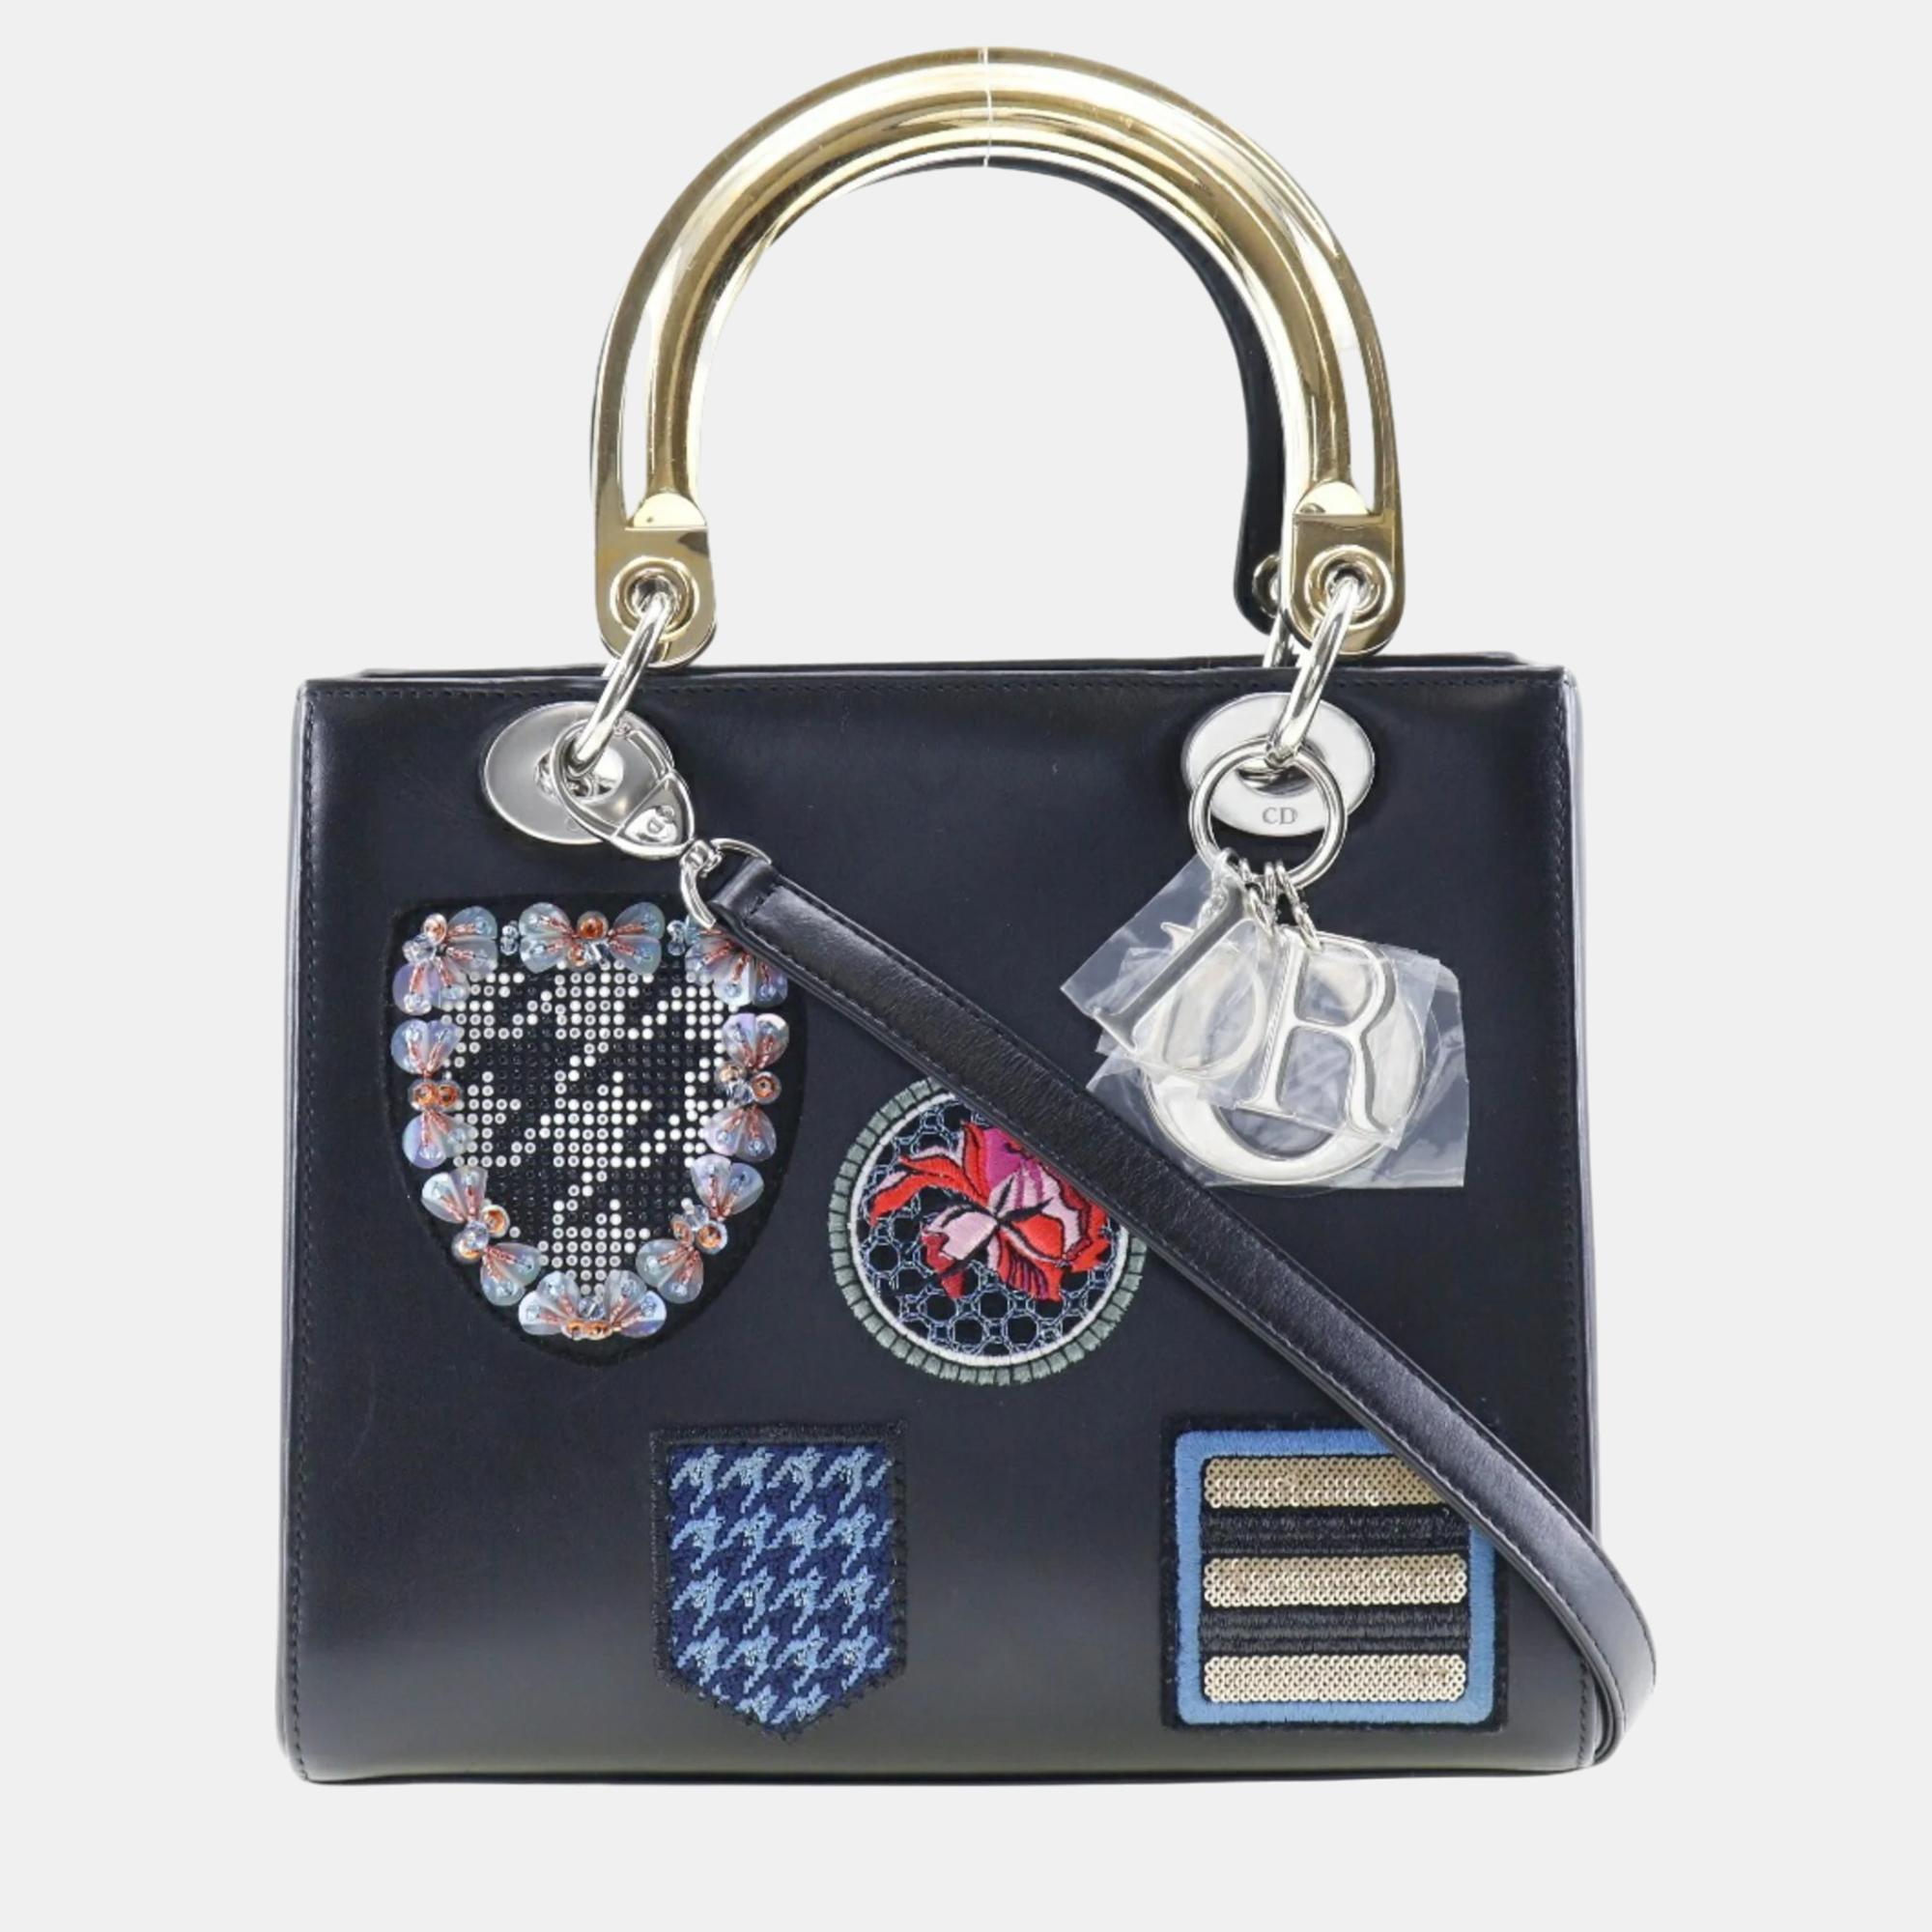 Dior blue leather with embroidered patches mini lady dior tote bag